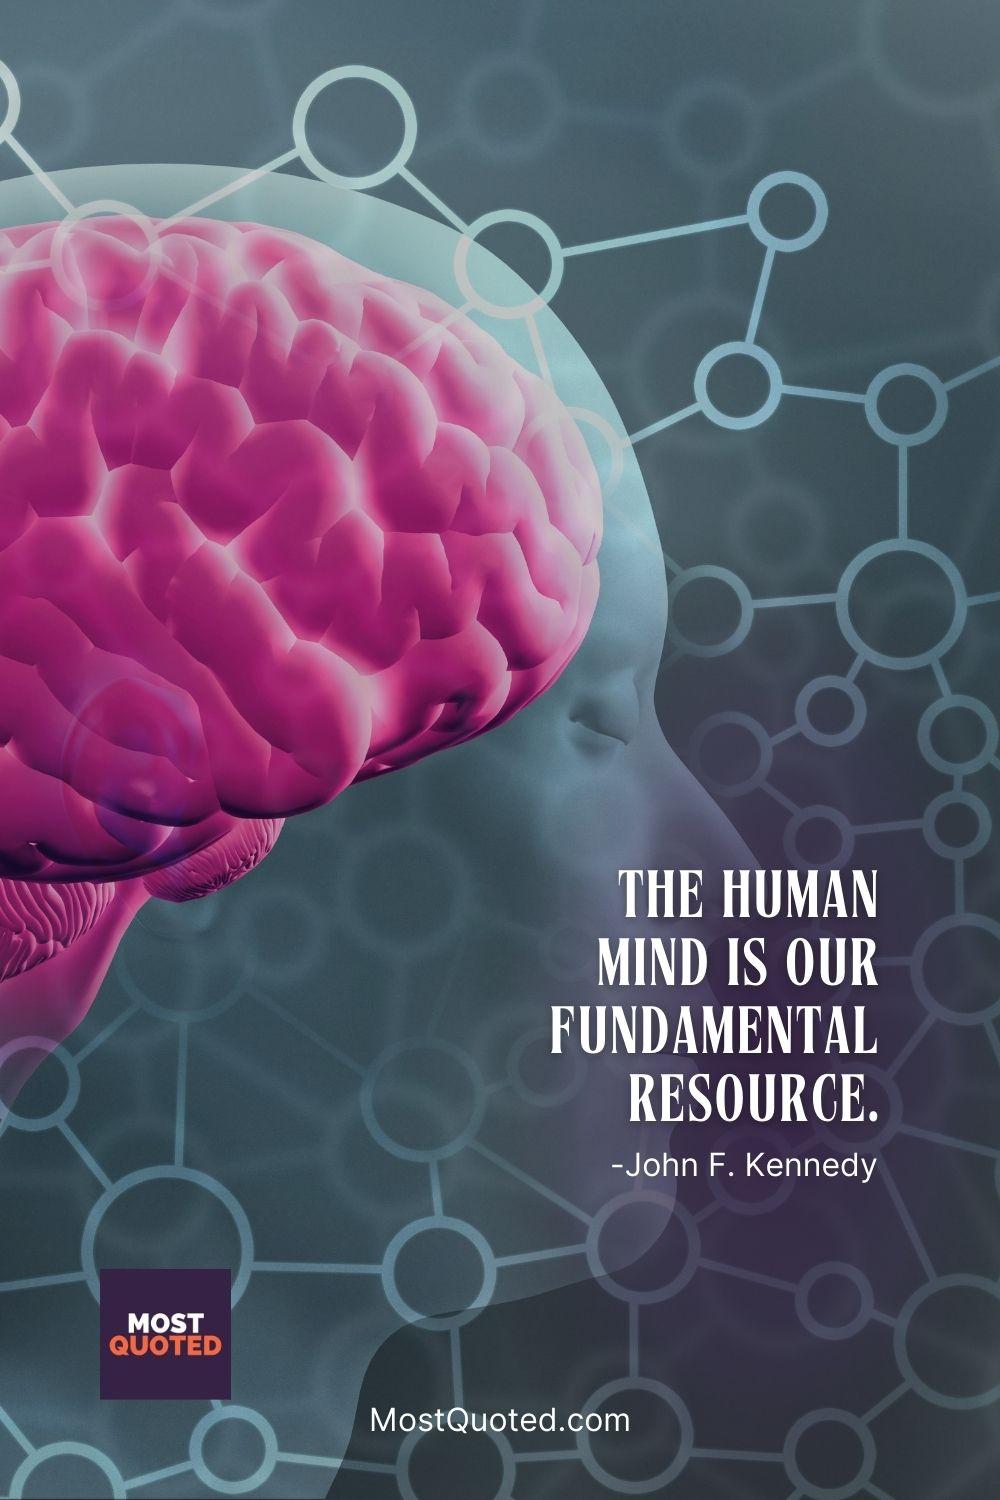 The human mind is our fundamental resource. - John F. Kennedy